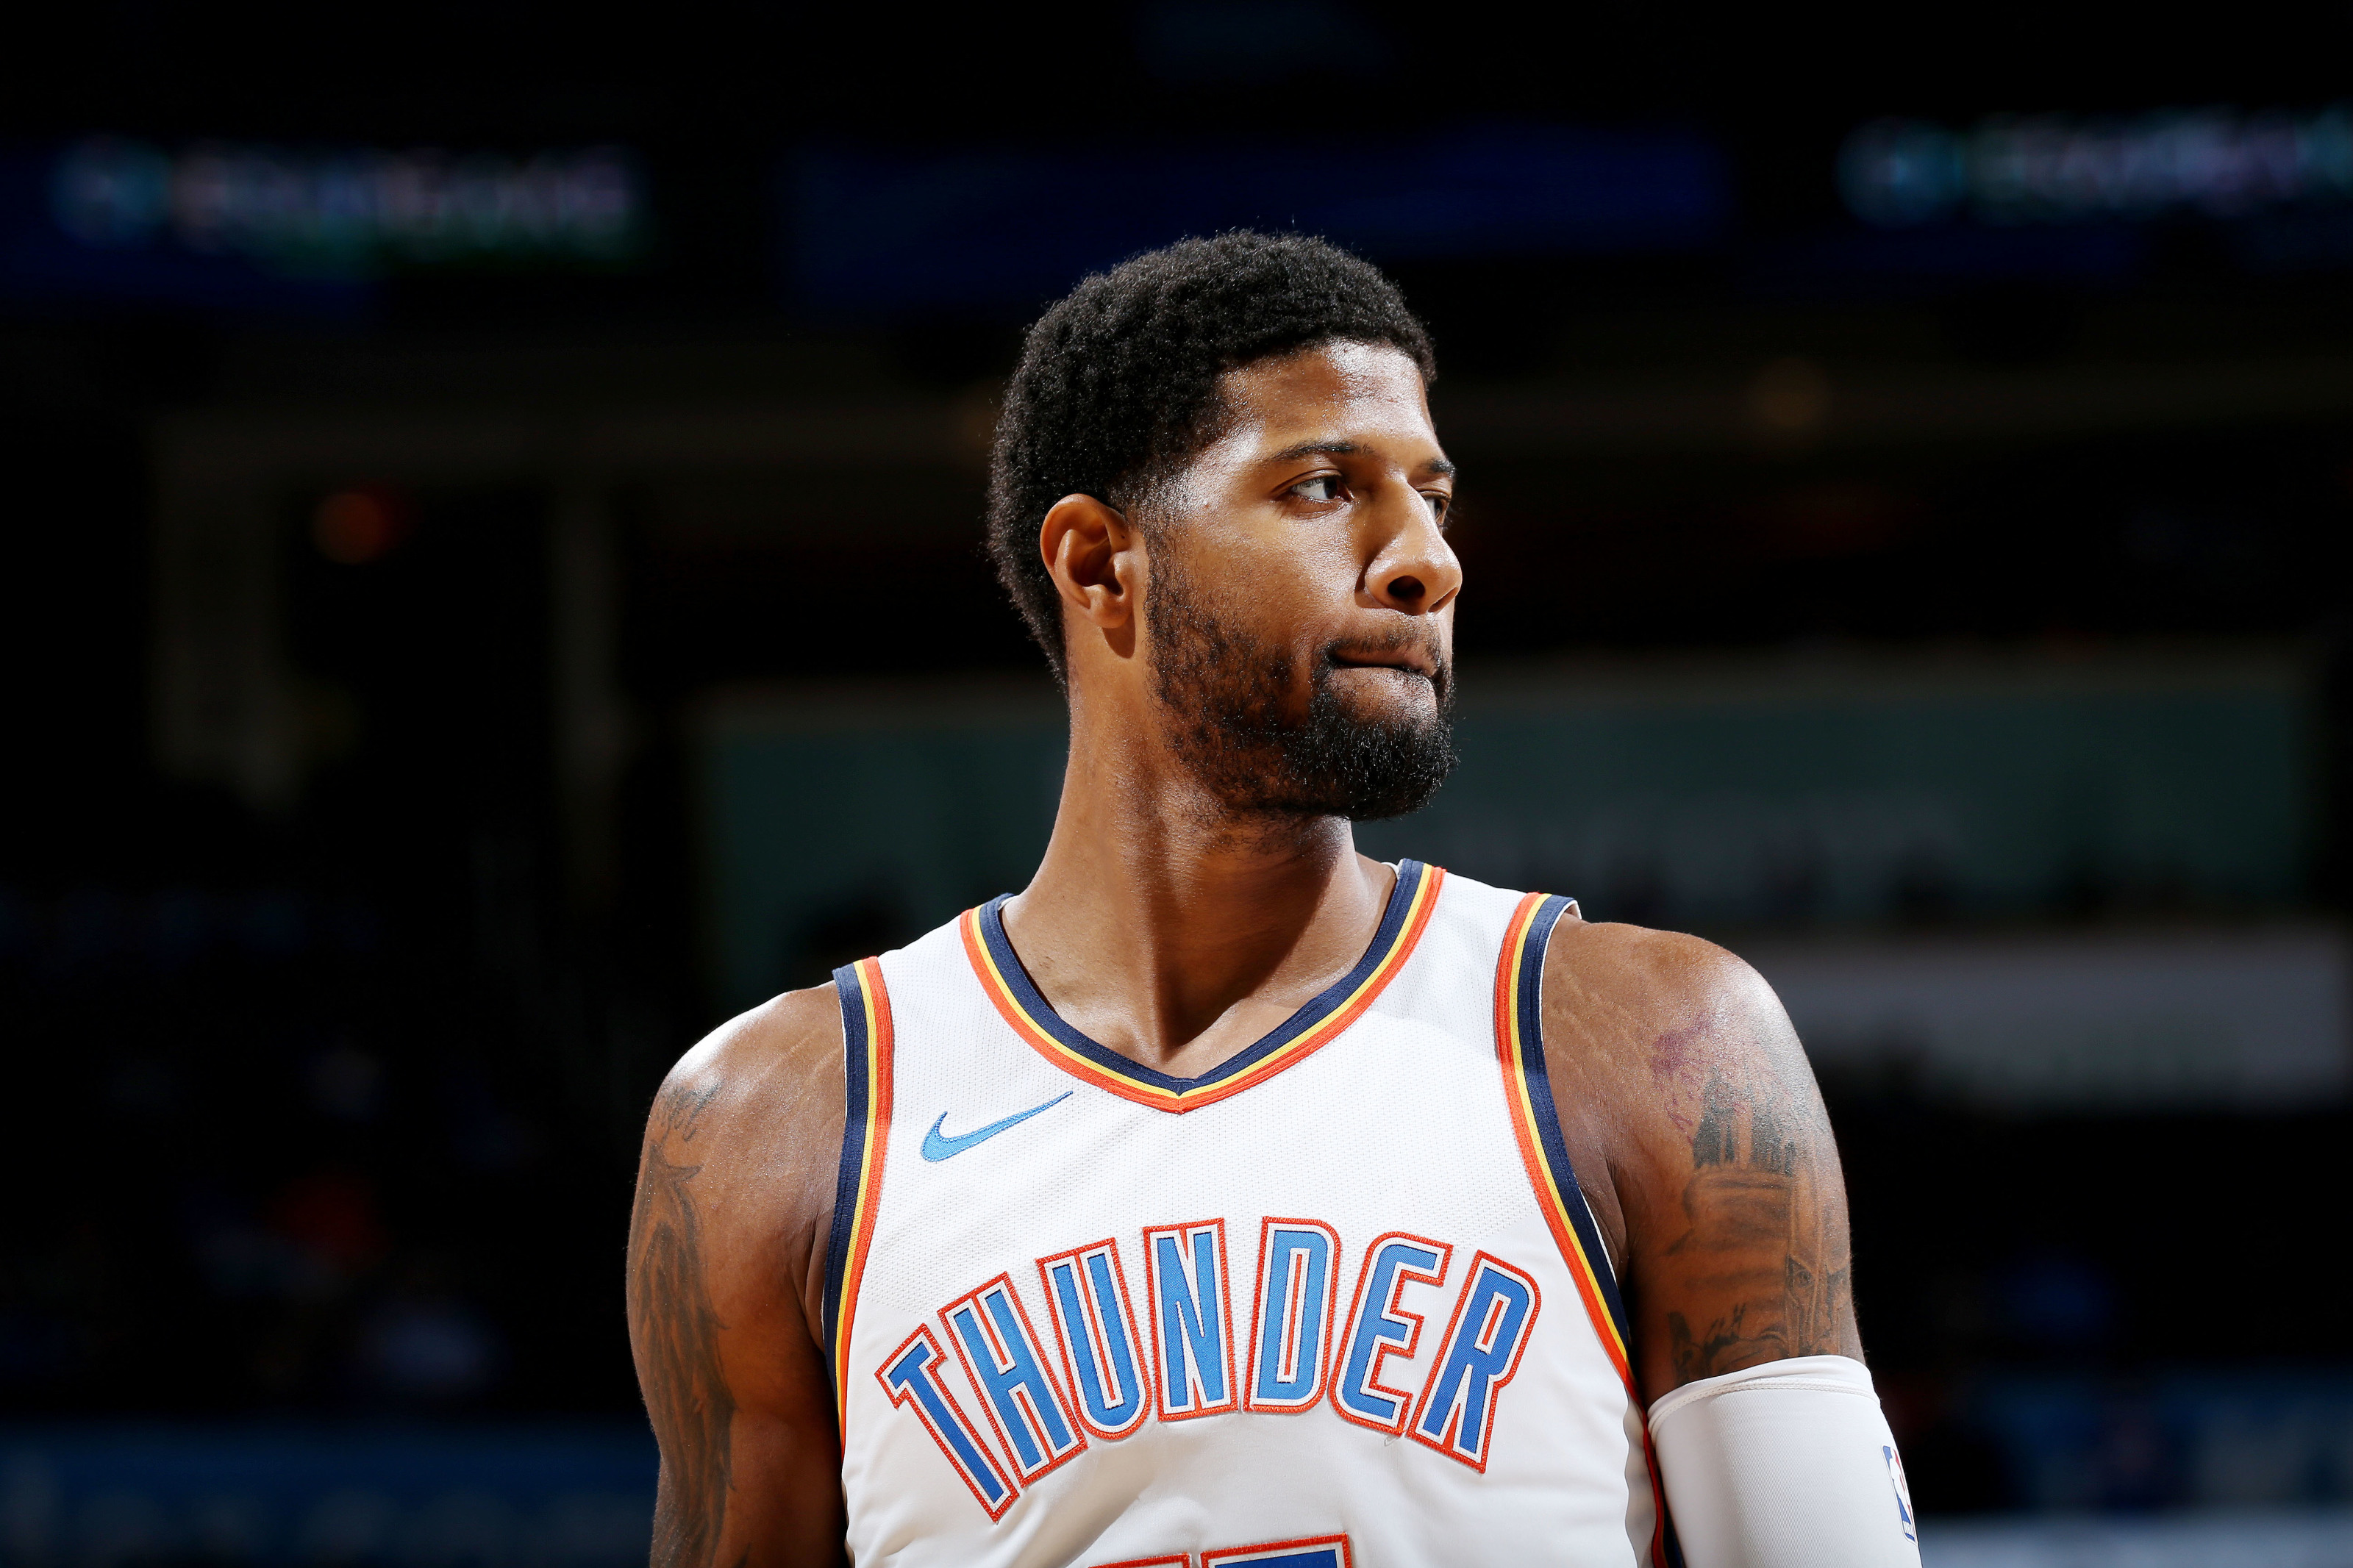 Paul George out for Thunder at Bucks